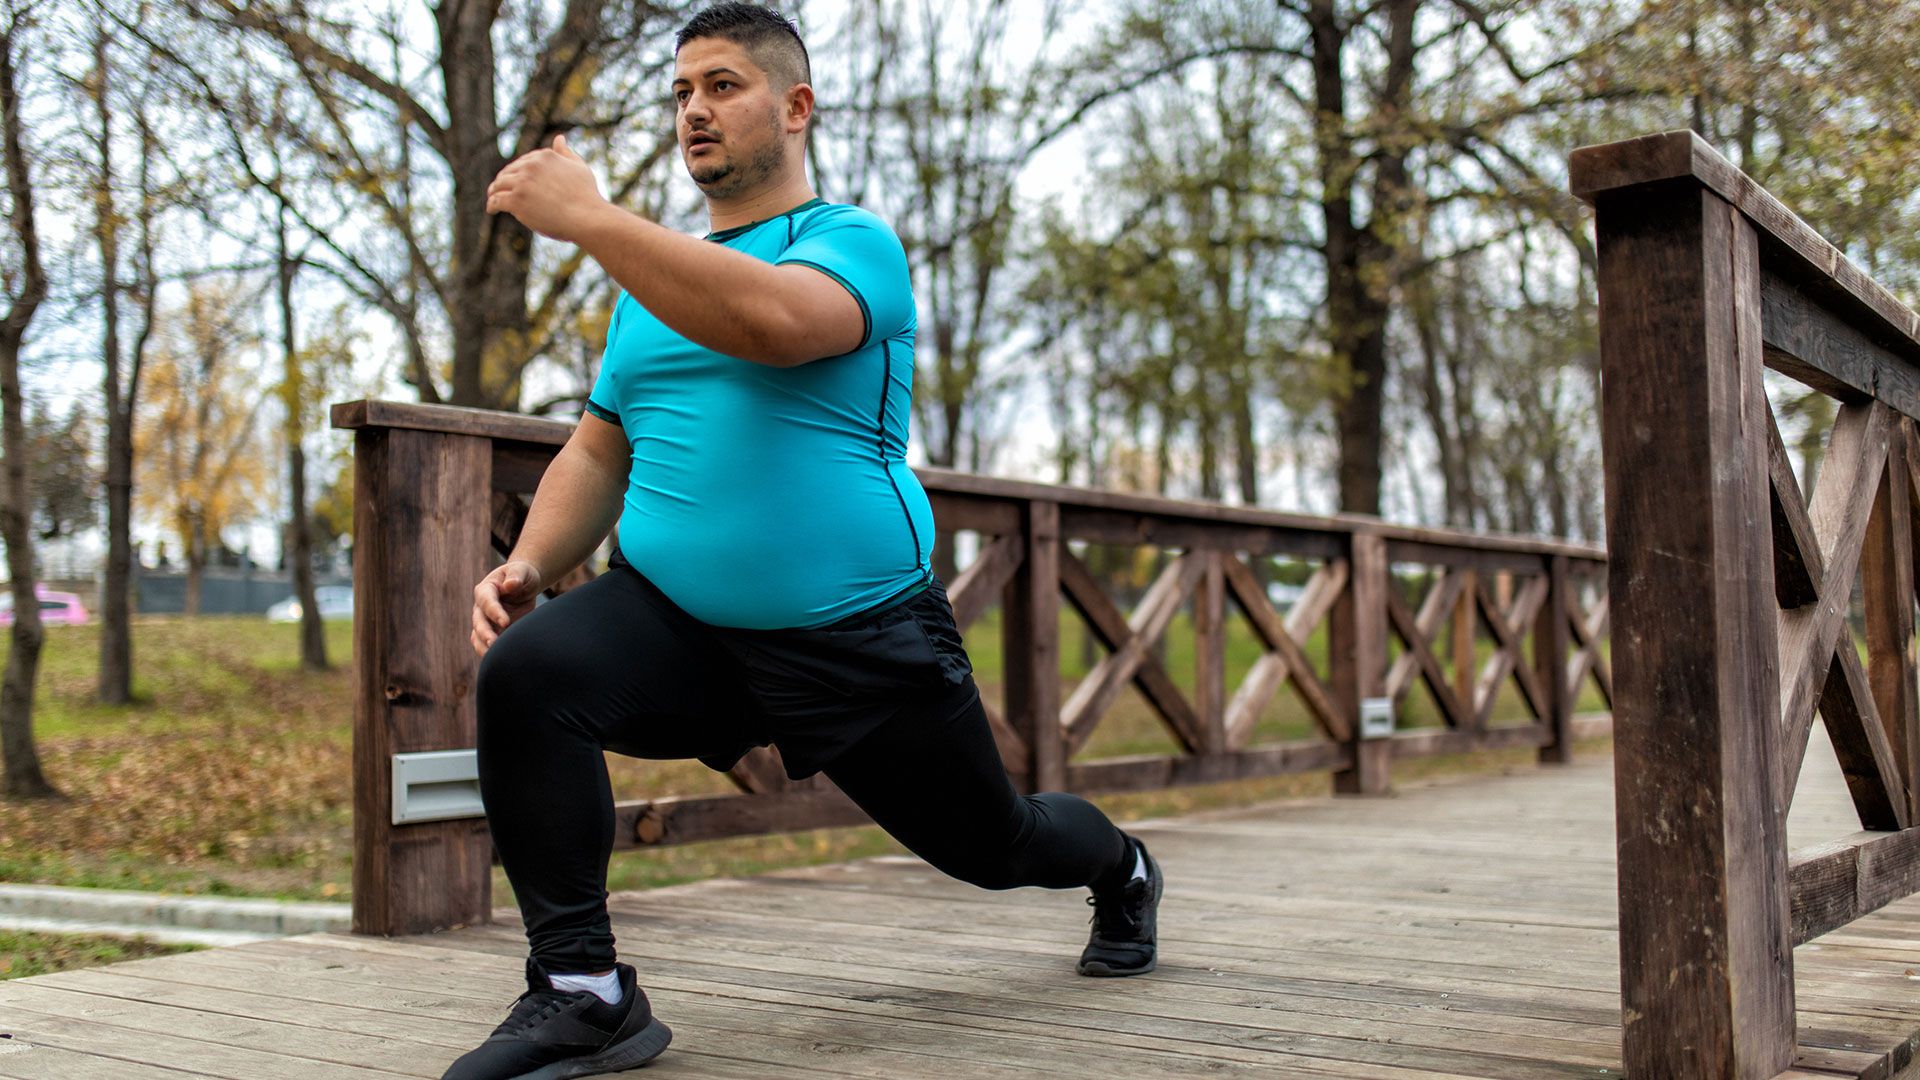 Experts from Harvard University stress the importance of increasing physical activity as an essential part of the fight against obesity (Gettyimages)